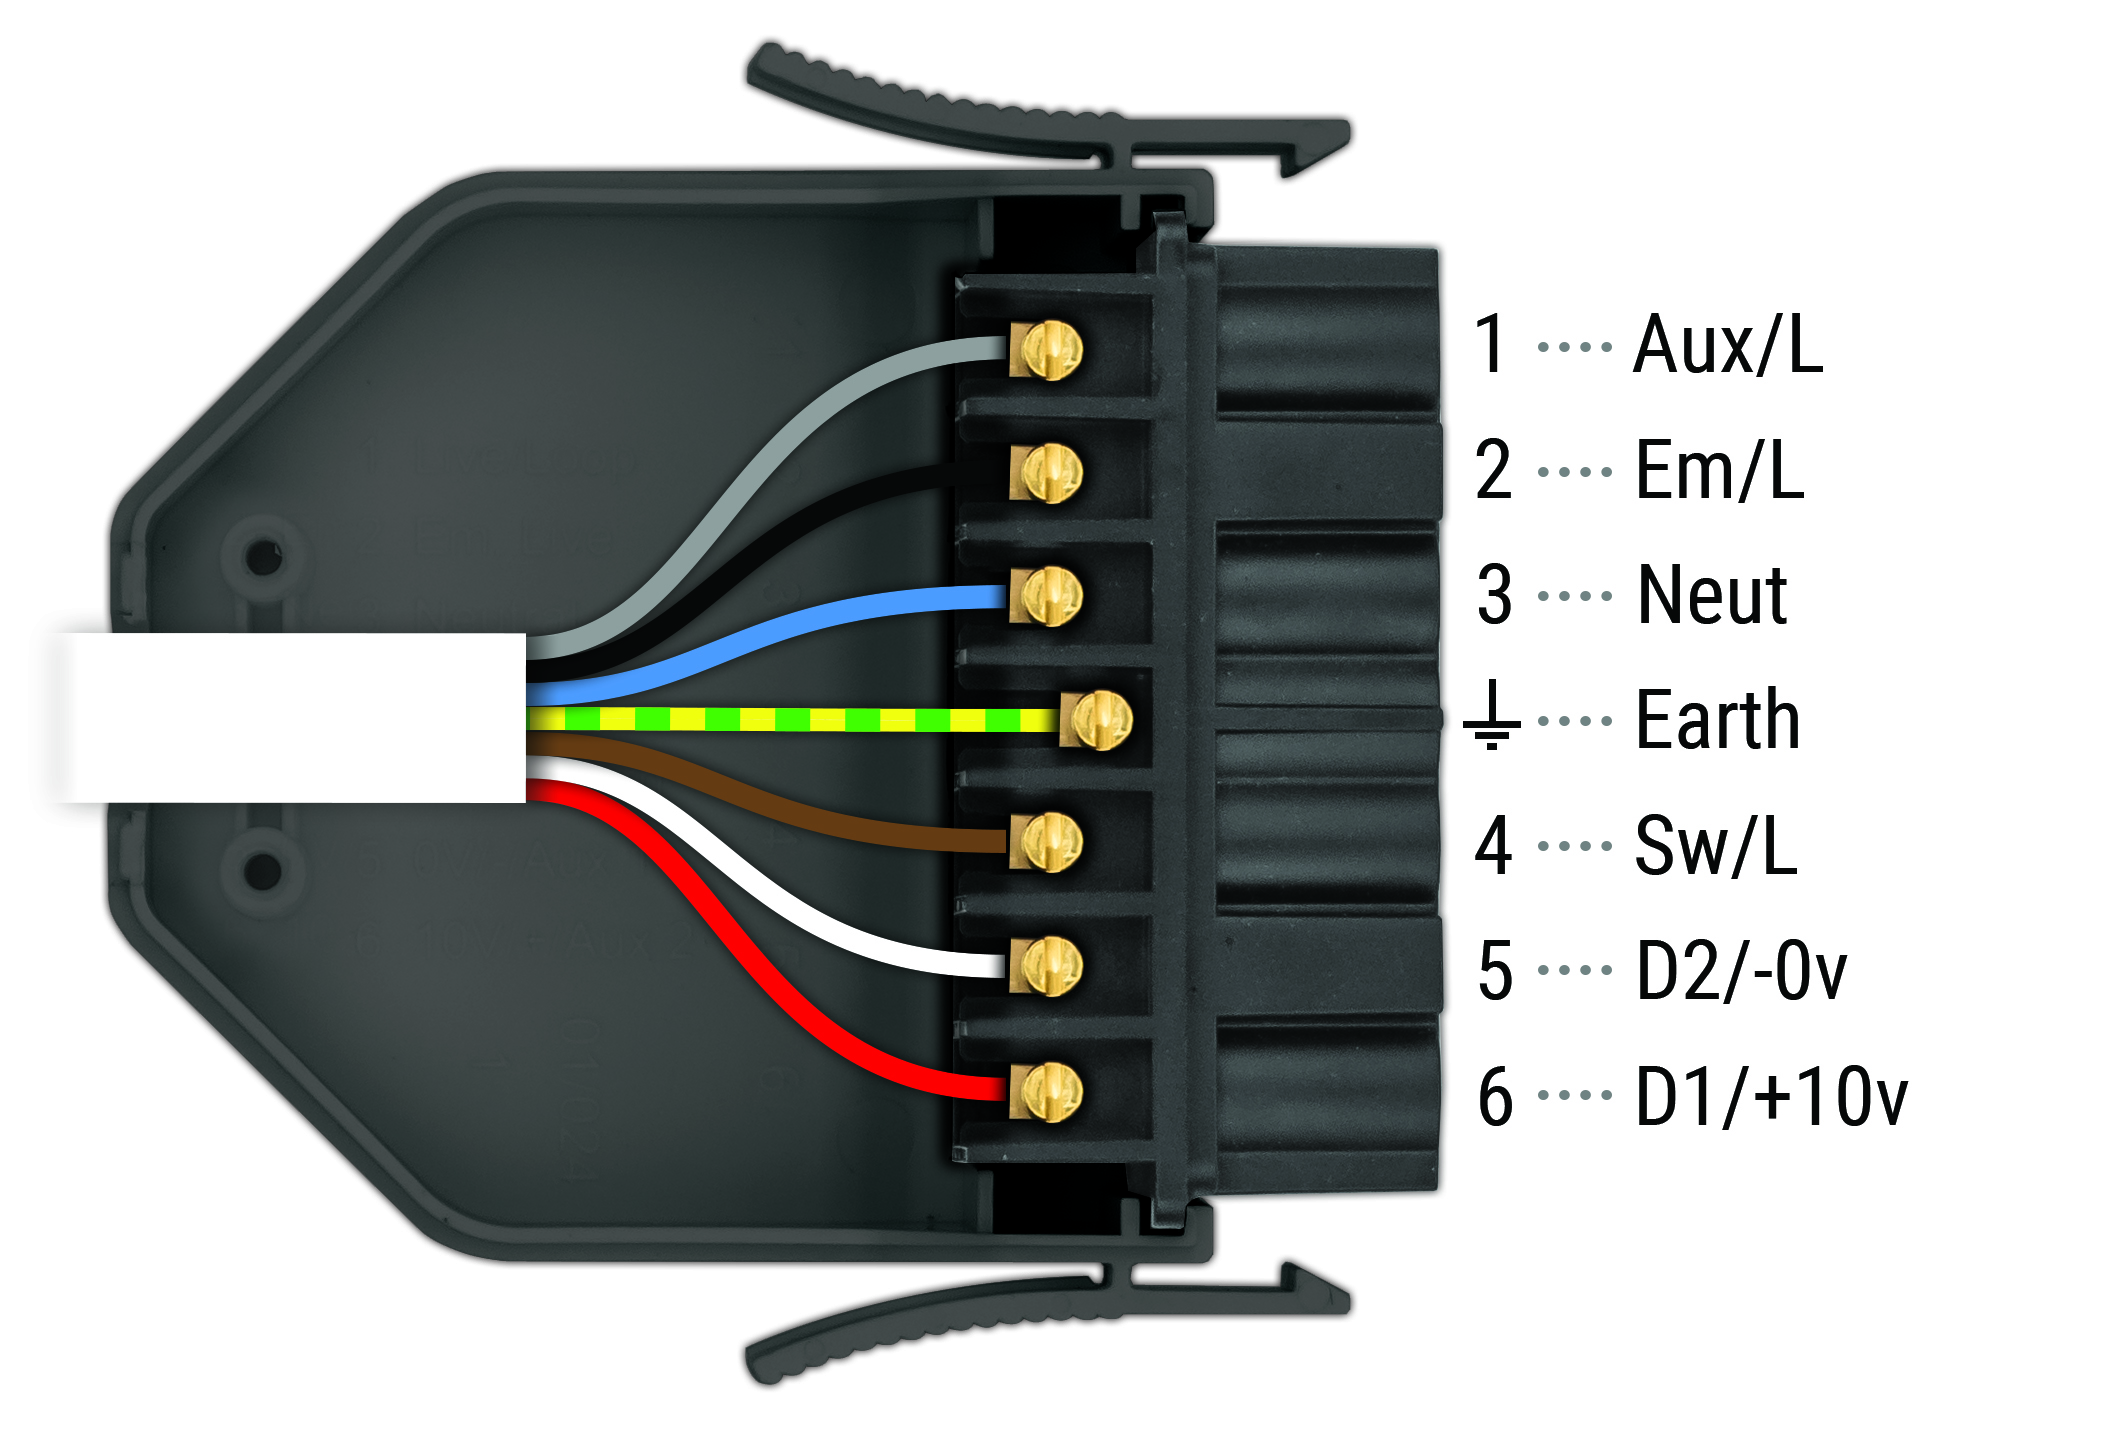 Wiring diagram for a flex7 7-pin lighting connection plug